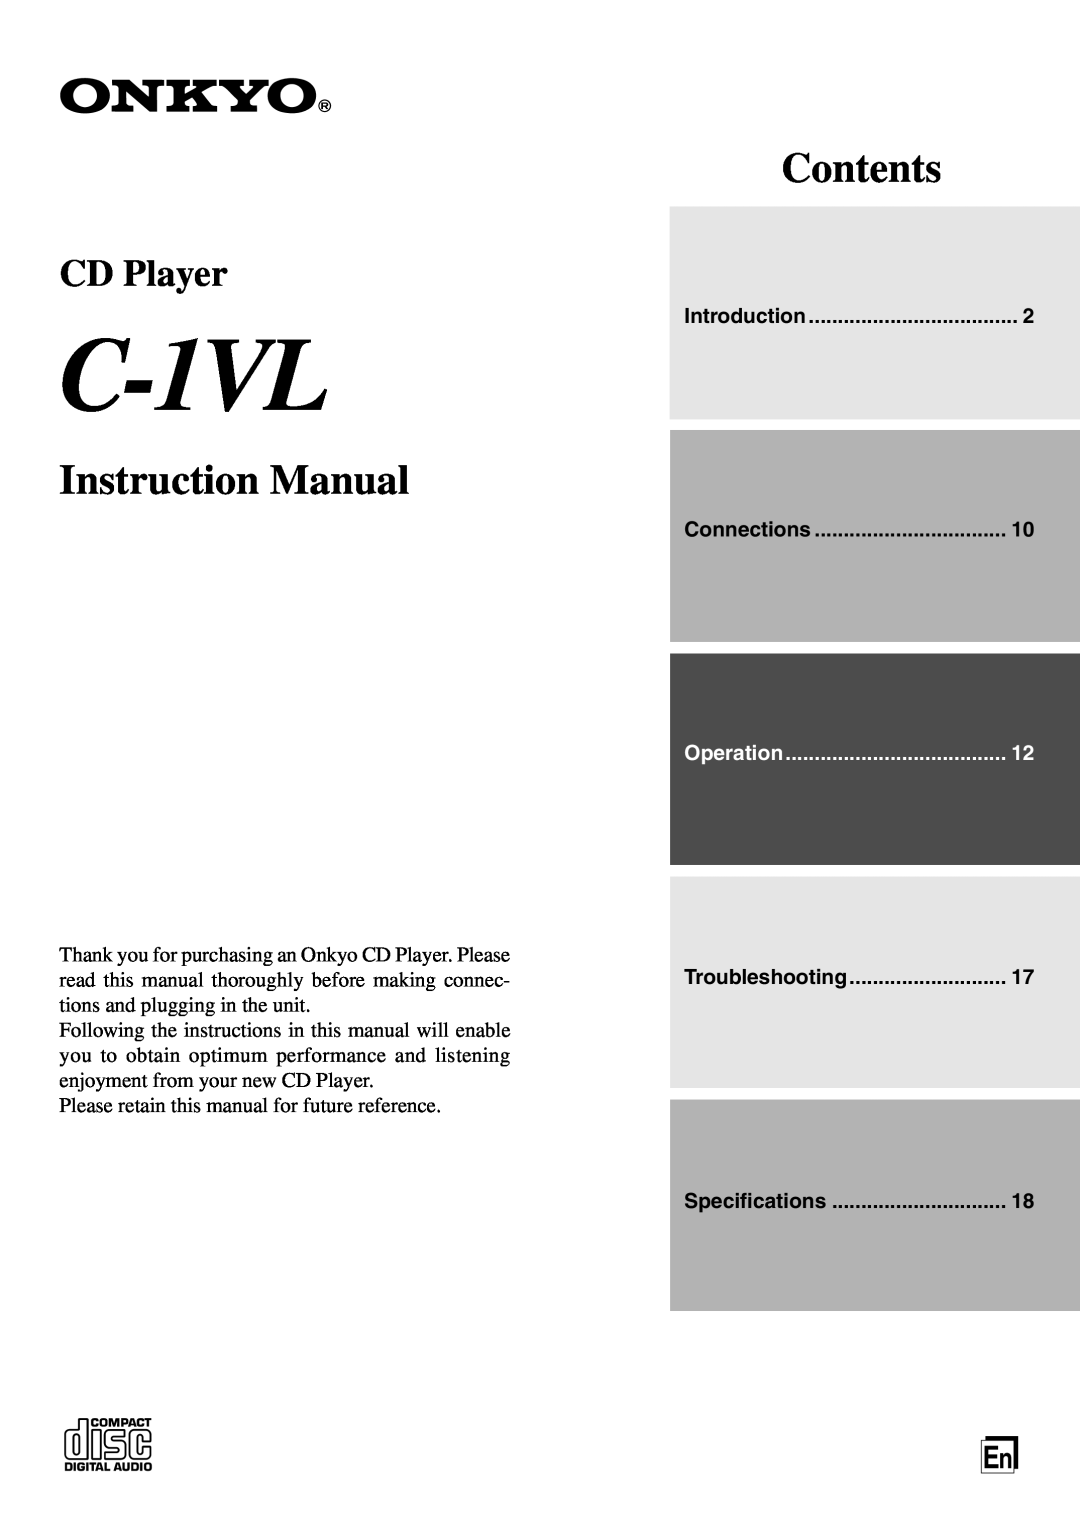 Onkyo C-1VL instruction manual Contents, CD Player 